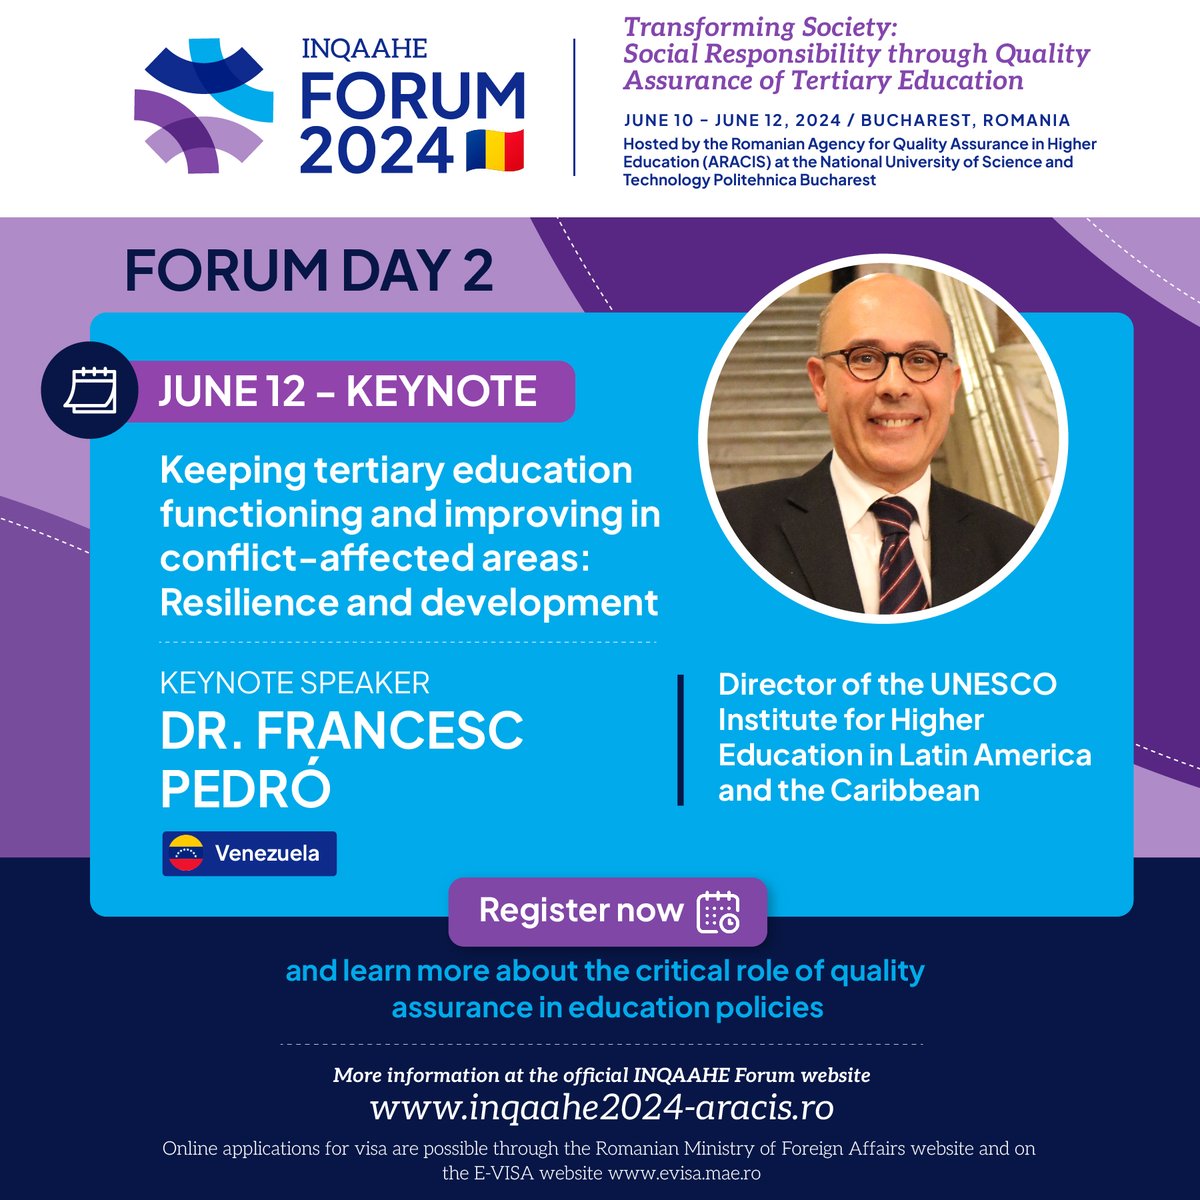 #INQAAHEForum2024: We will be delighted to count on Dr. Francesc Pedró’s keynote address, Director of @unesco_iesalc, on Keeping tertiary education functioning and improving in conflict-affected areas. ➡️ Check all details about his keynote: inqaahe.org/blog/forum-202…